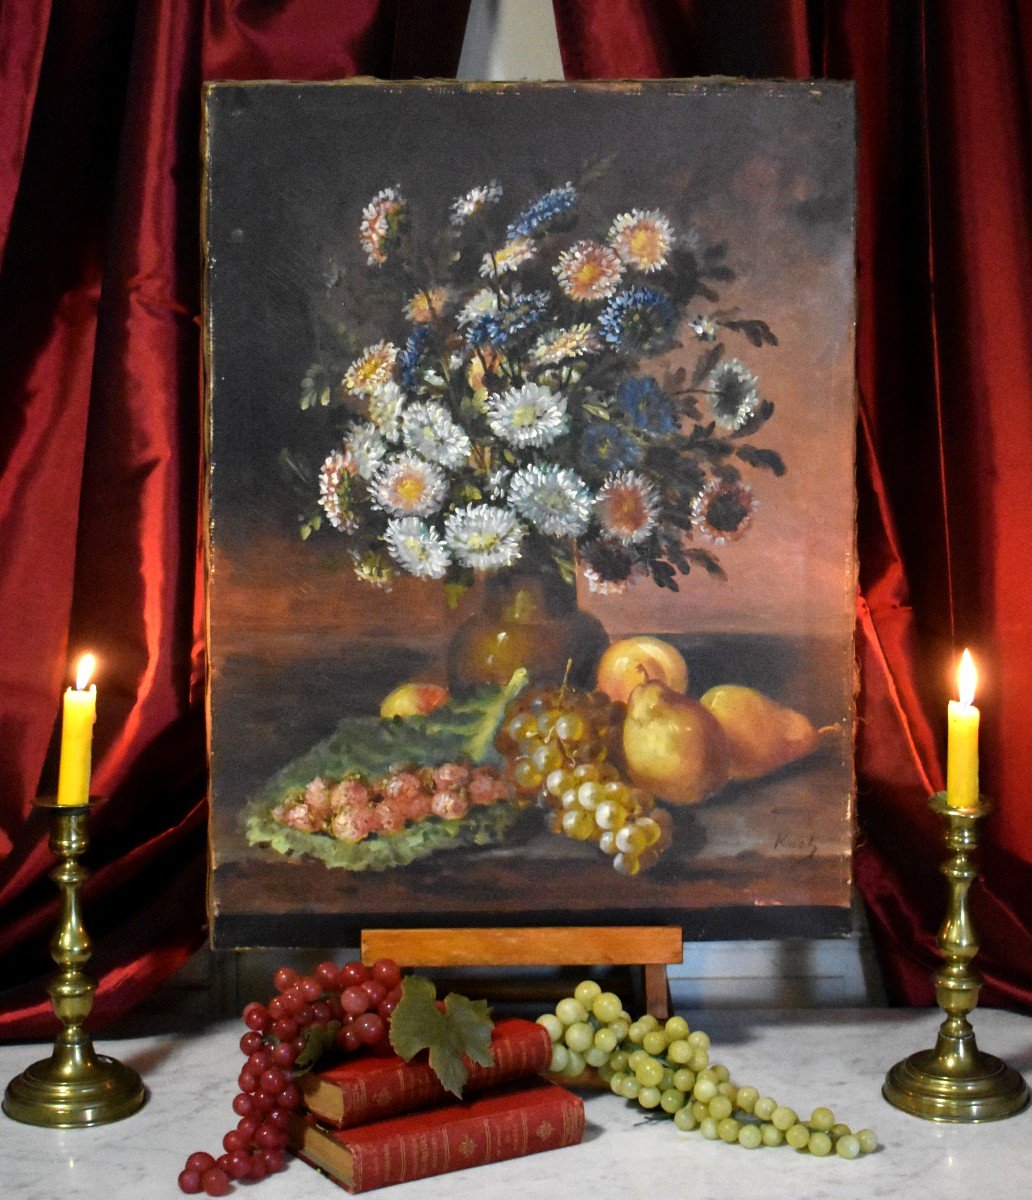 Still Life With Autumn Fruits And Flowers On Entablature, Oil On Canvas, XIX Eme